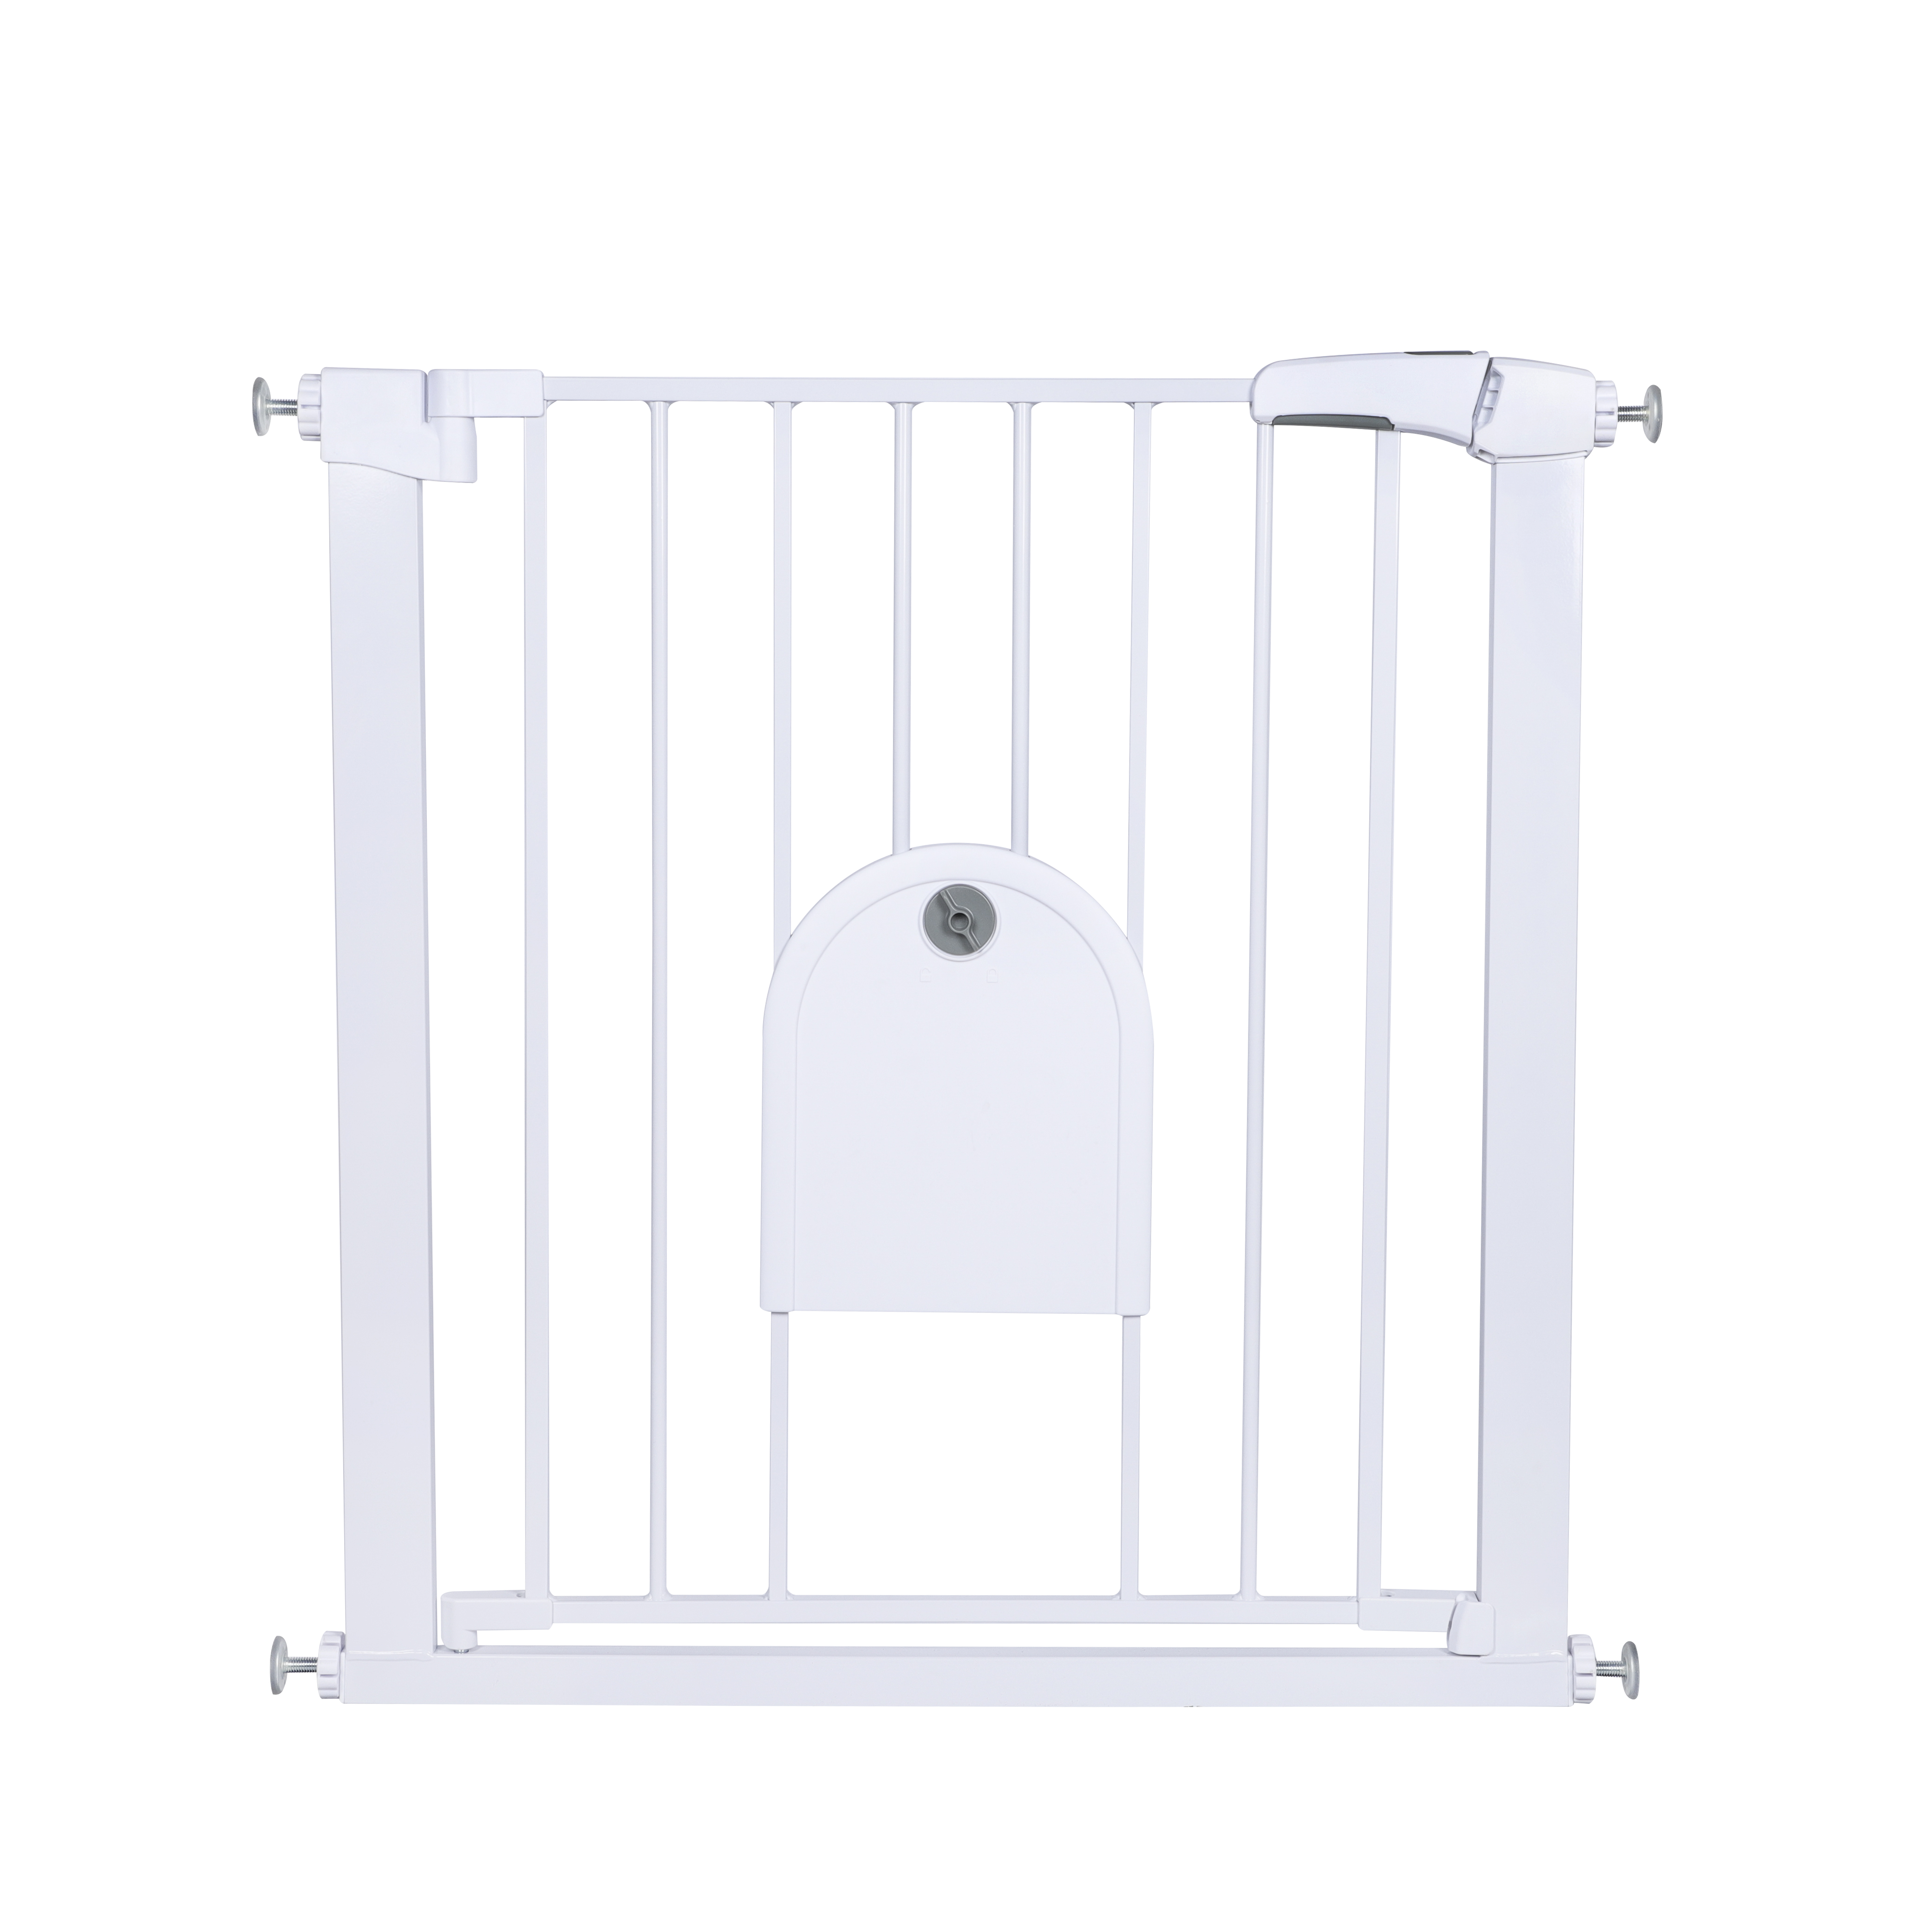 Baby safety gate with petdoor SG-020-1